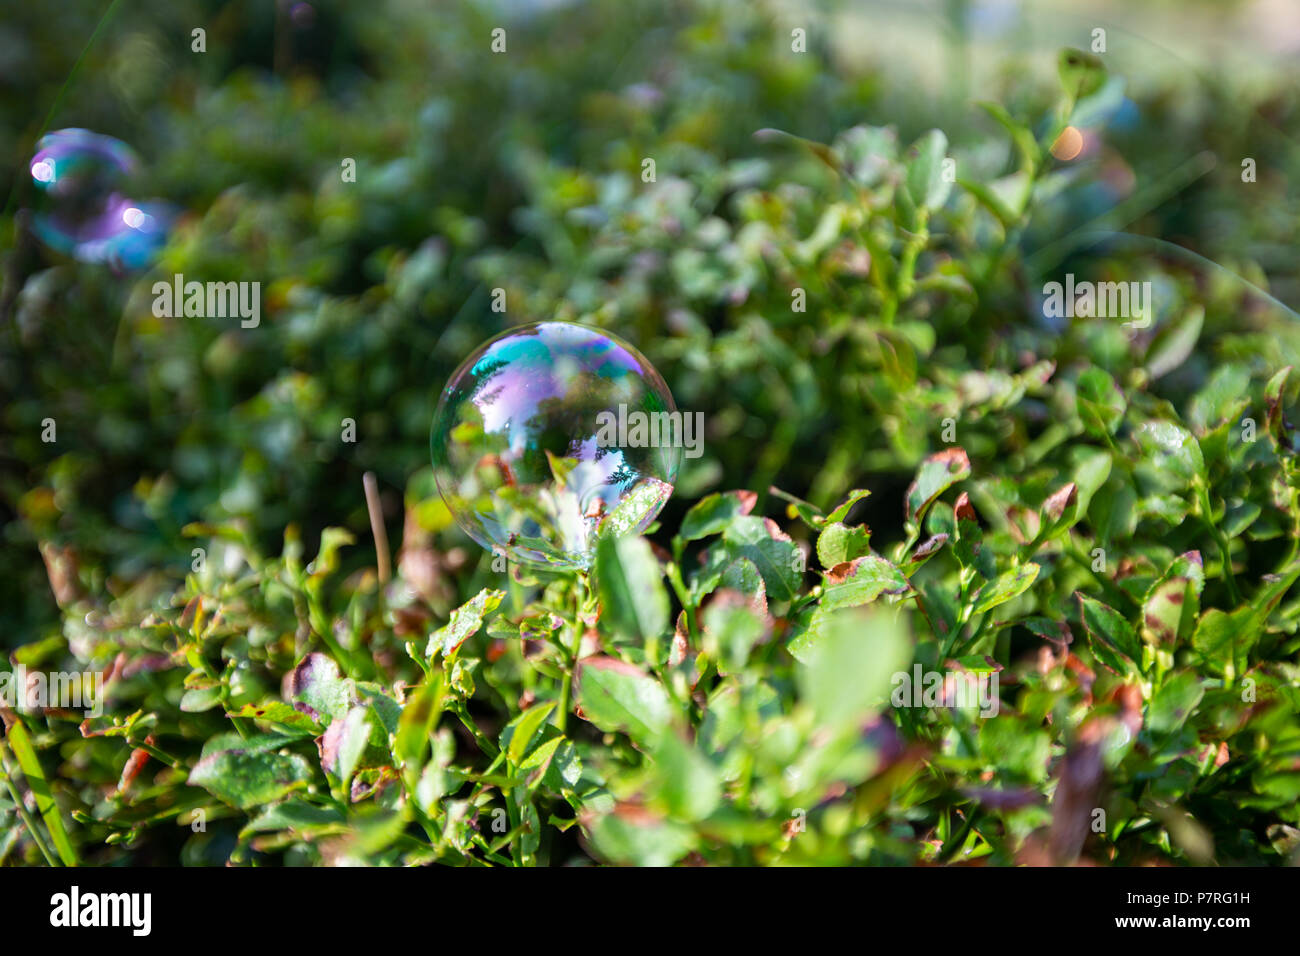 Bubbles caught on the branches of green bush. Stock Photo